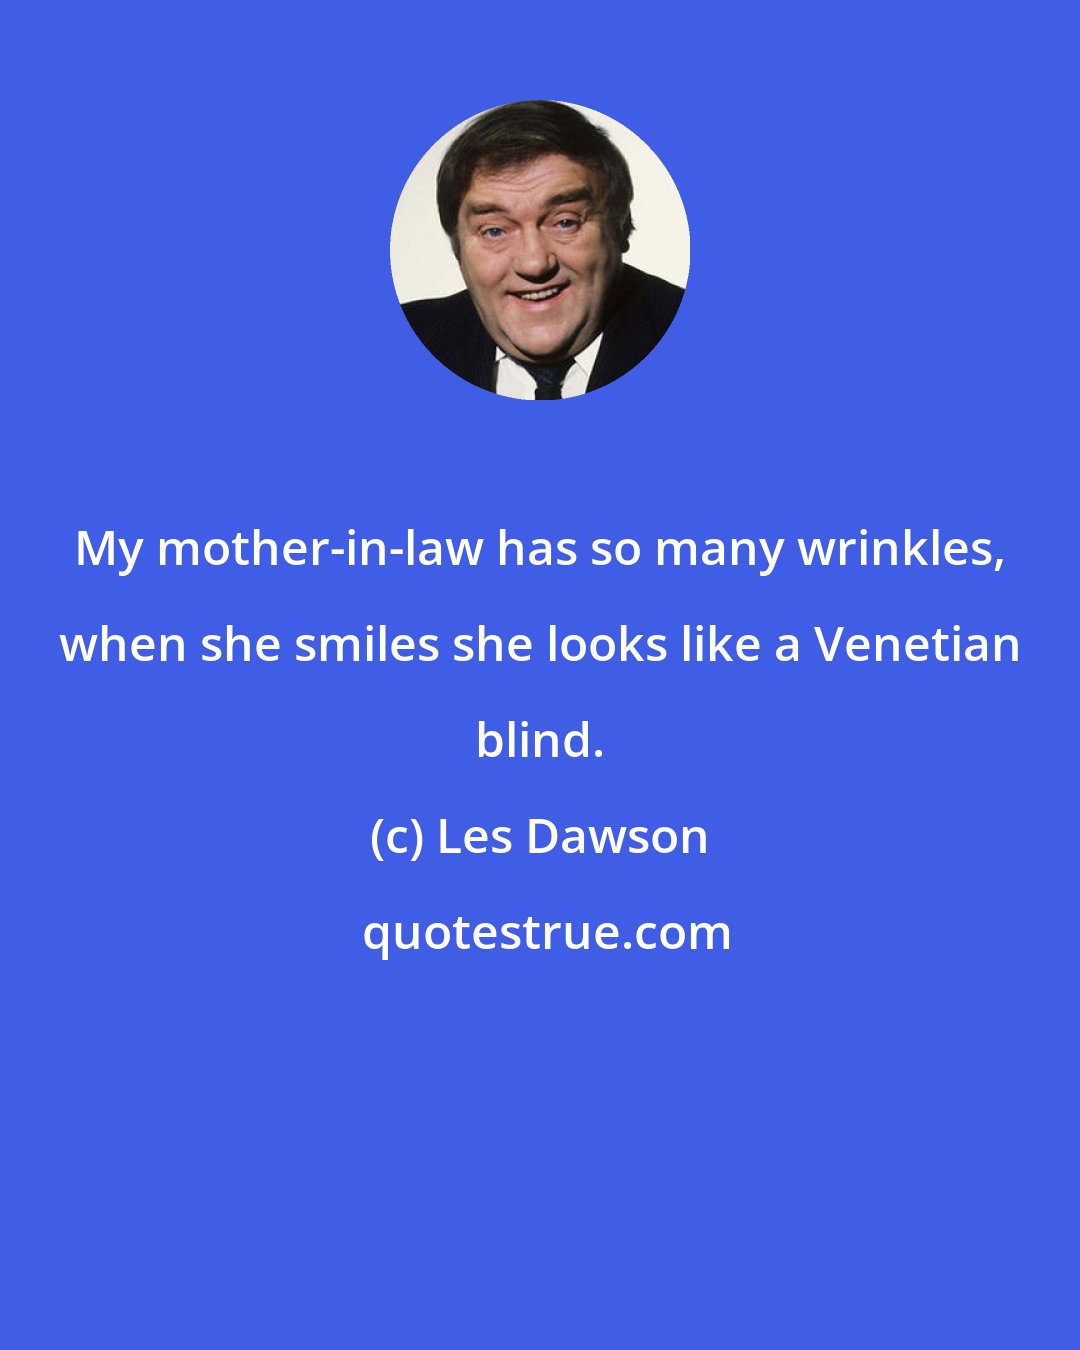 Les Dawson: My mother-in-law has so many wrinkles, when she smiles she looks like a Venetian blind.